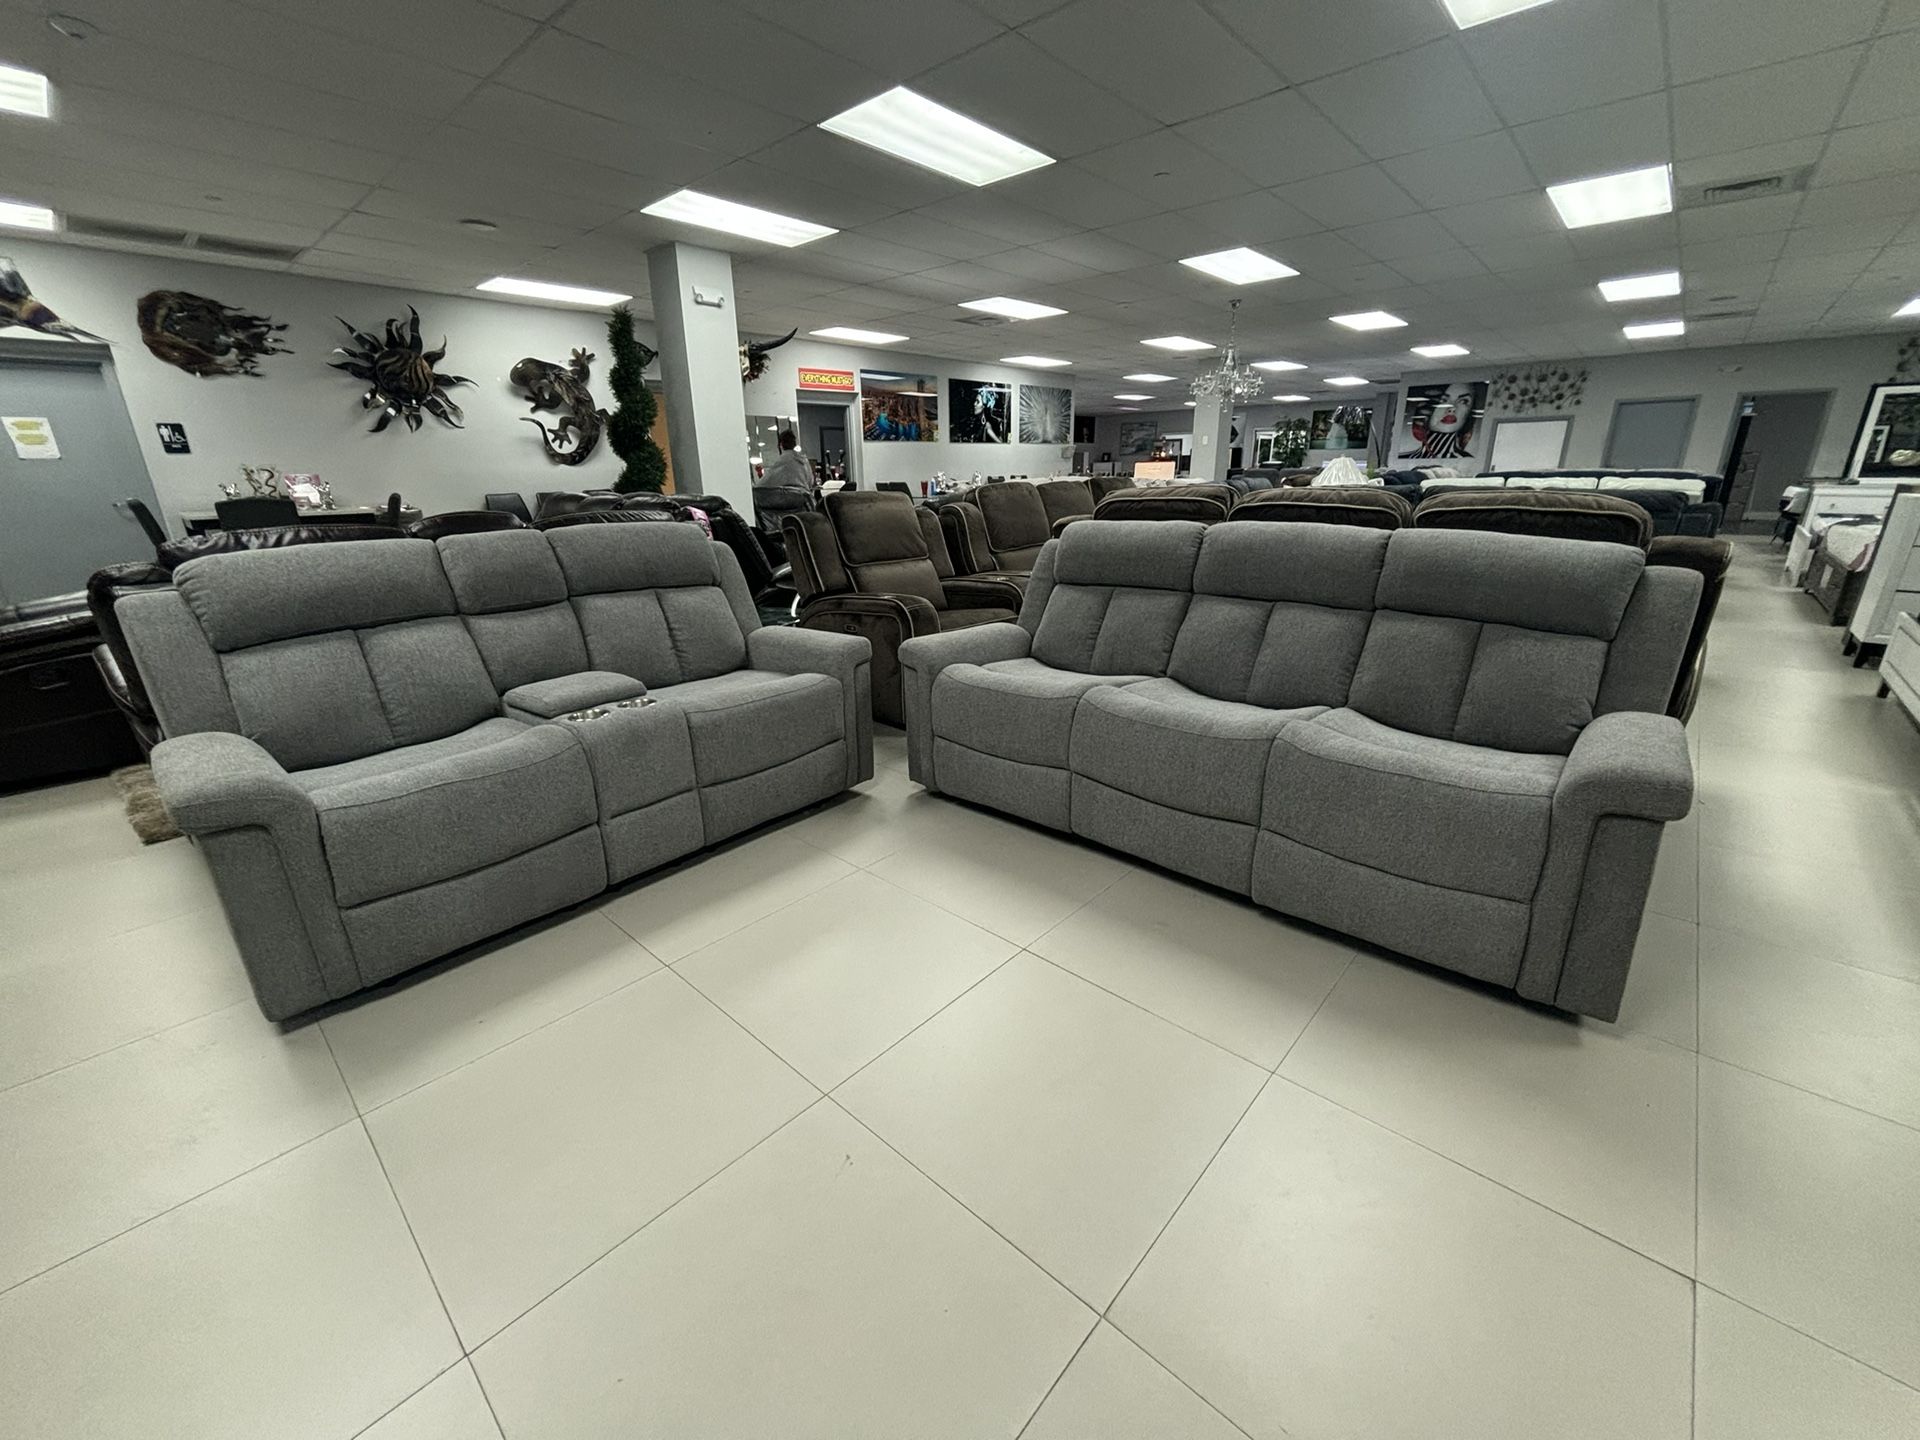 Micro Fiber Sofa And Loveseat Living Room Set For Only $999. 4 RECLINERS! Store Is Closing Only While Supplies Last